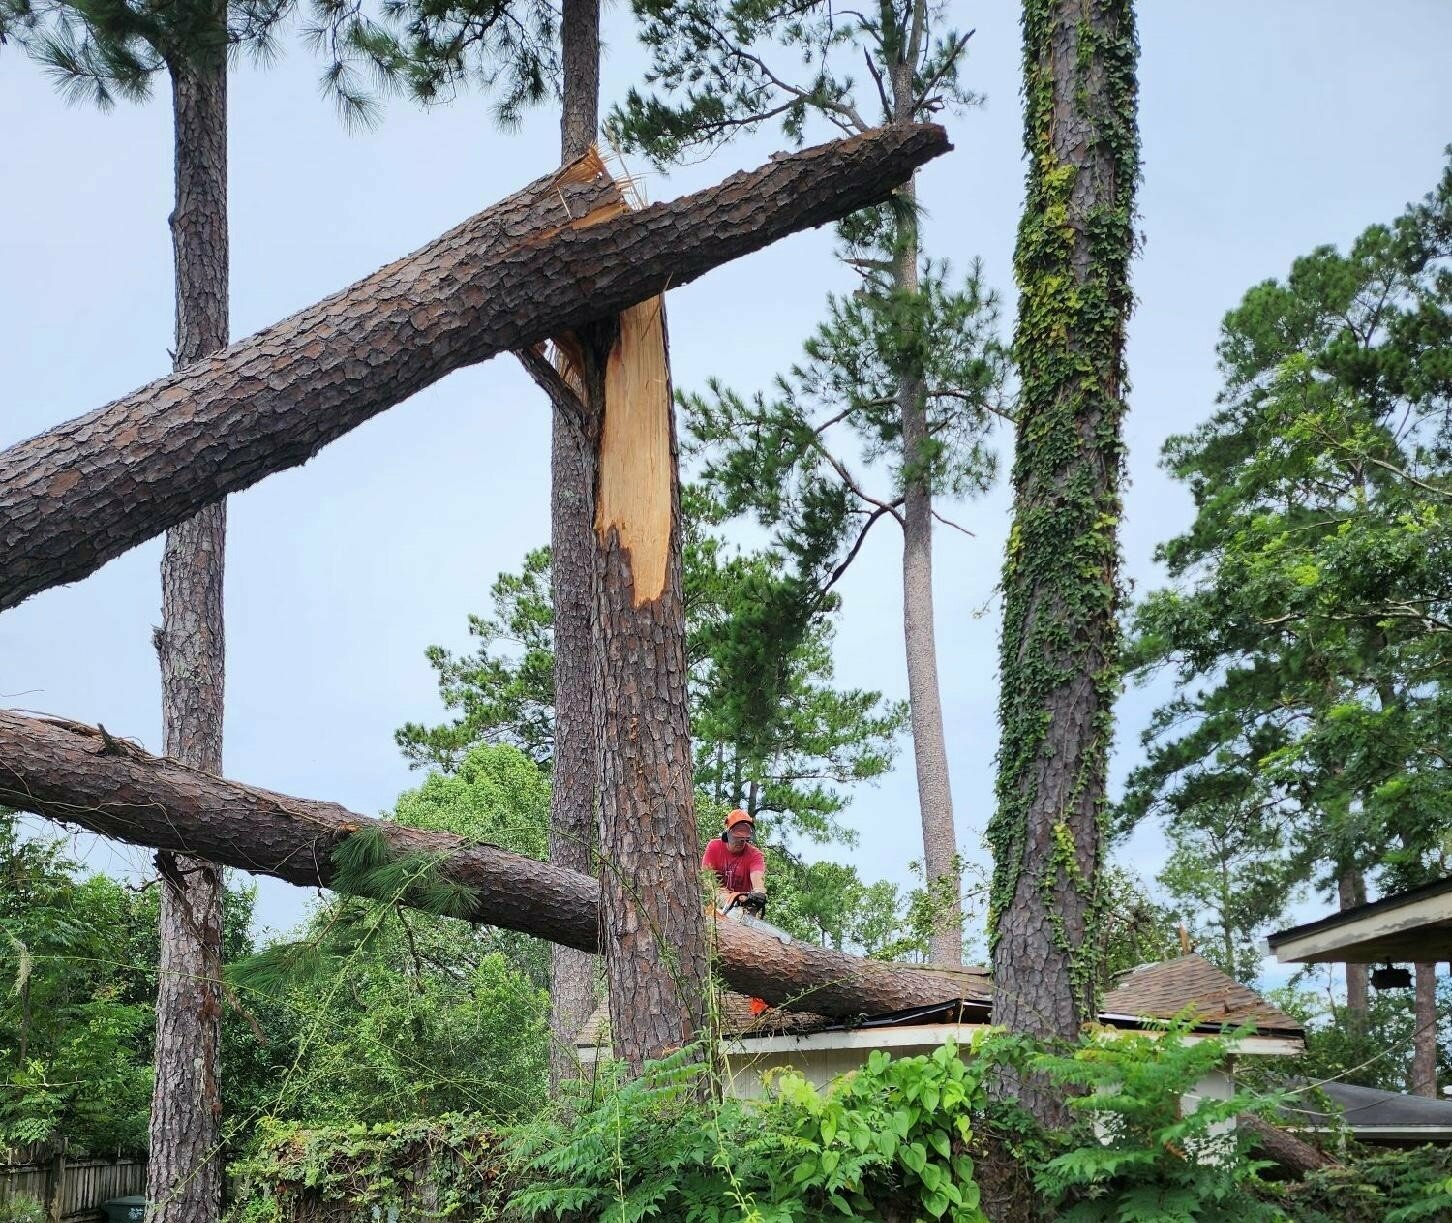 Georgia Baptist Disaster Relief volunteer Scott Smith saws a tree from a home in Valdosta, Ga., in the wake of Hurricane Idalia. The size of the toppled trees complicated the cleanup process.